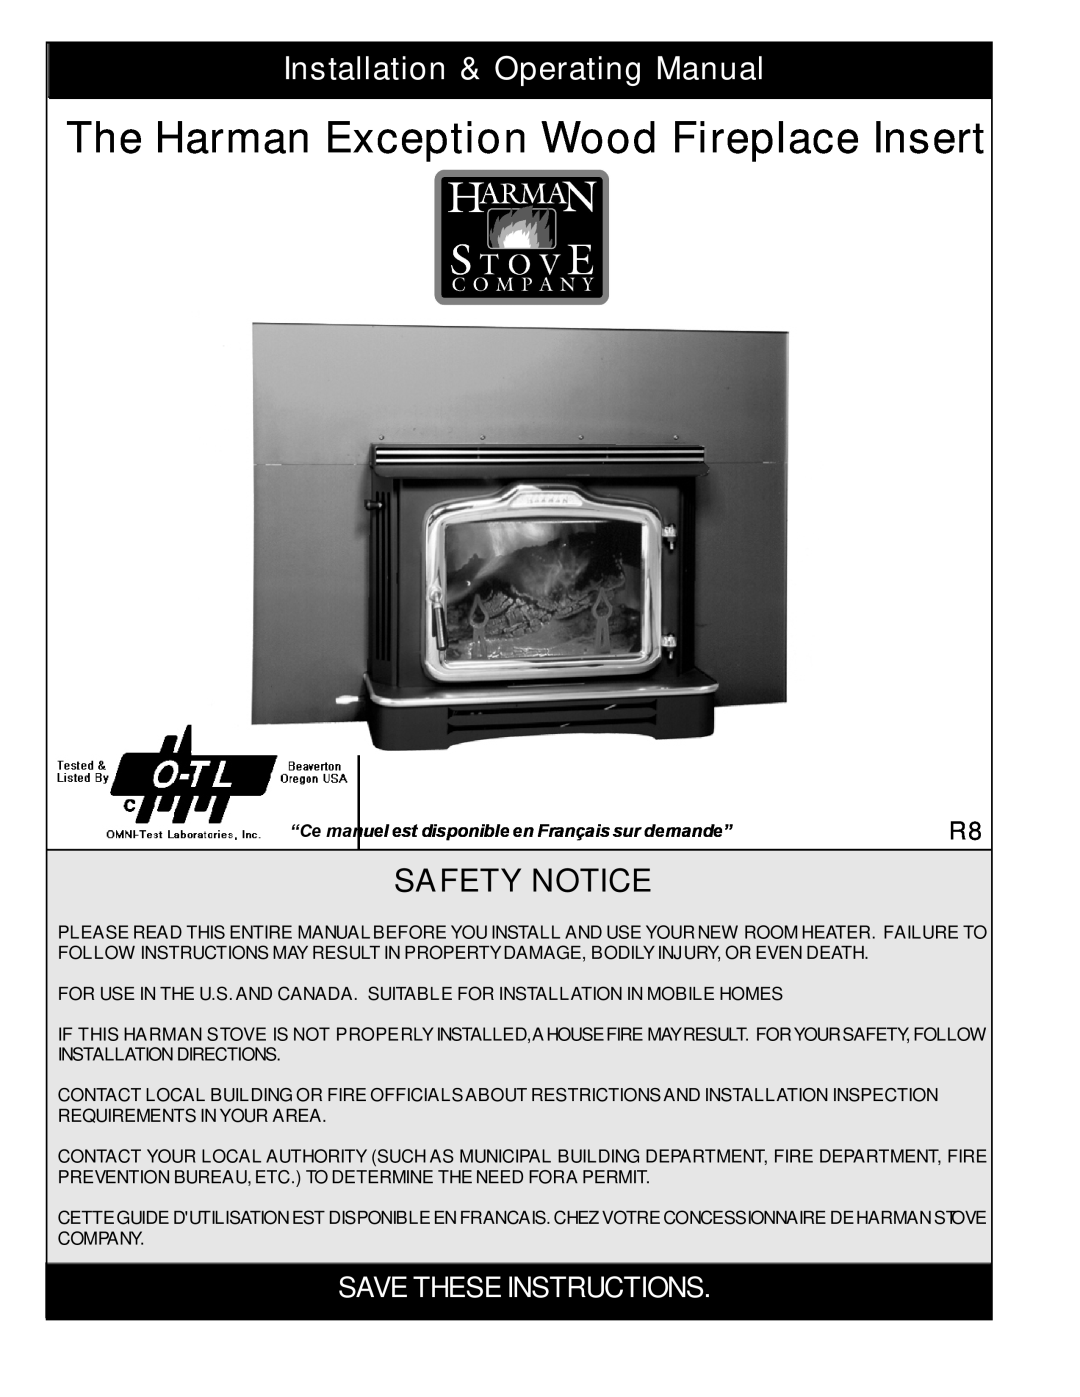 Harman Stove Company R7R1 Exception Wood Fireplace manual The Harman Exception Wood Fireplace Insert, Safety Notice 